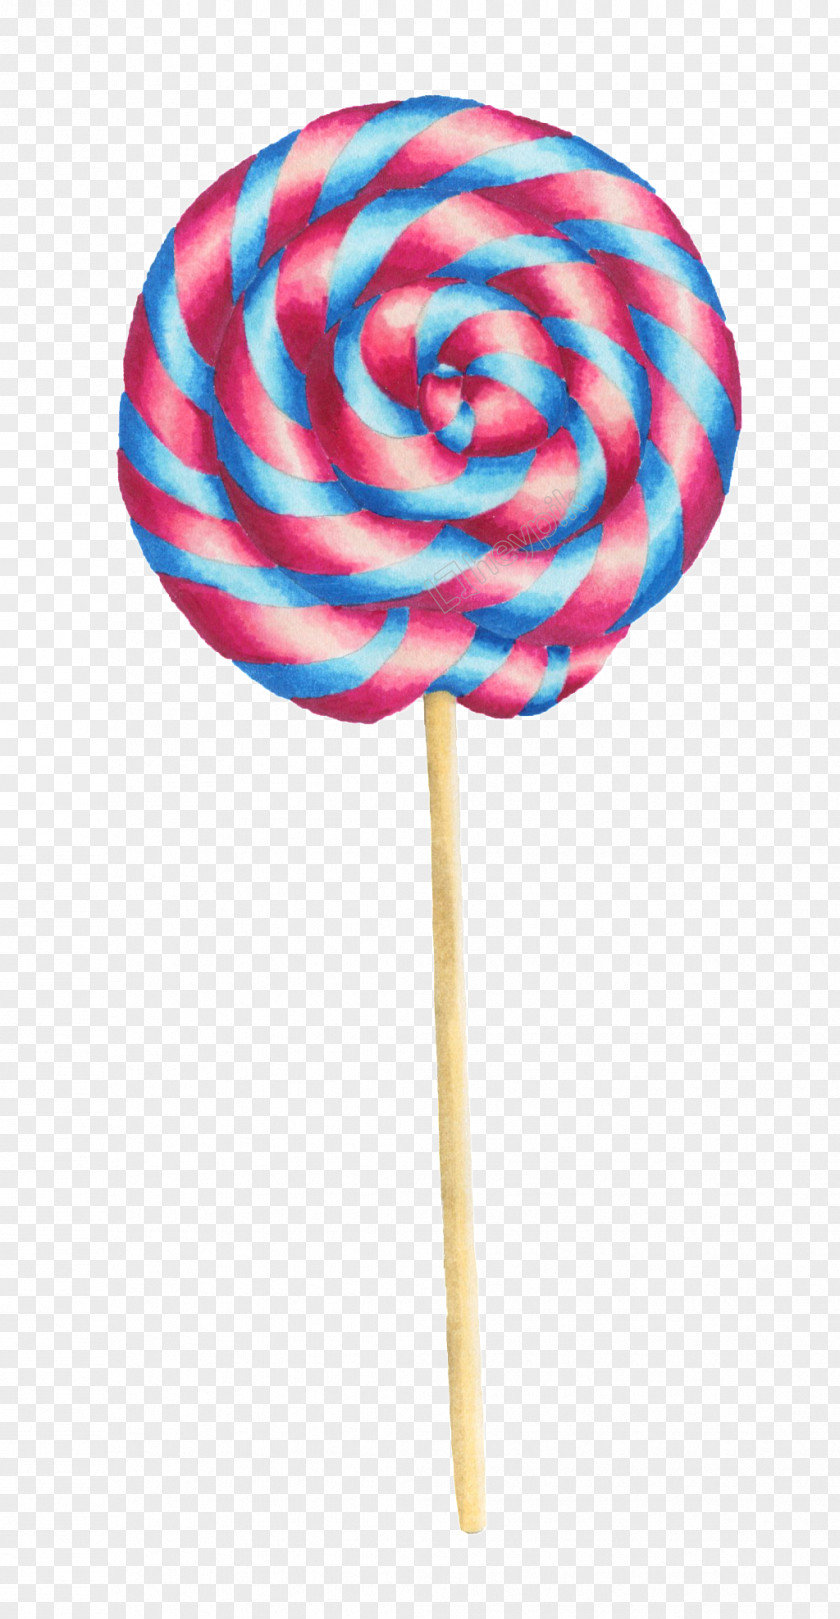 Food Pink Lollipop Stick Candy Confectionery Hard PNG